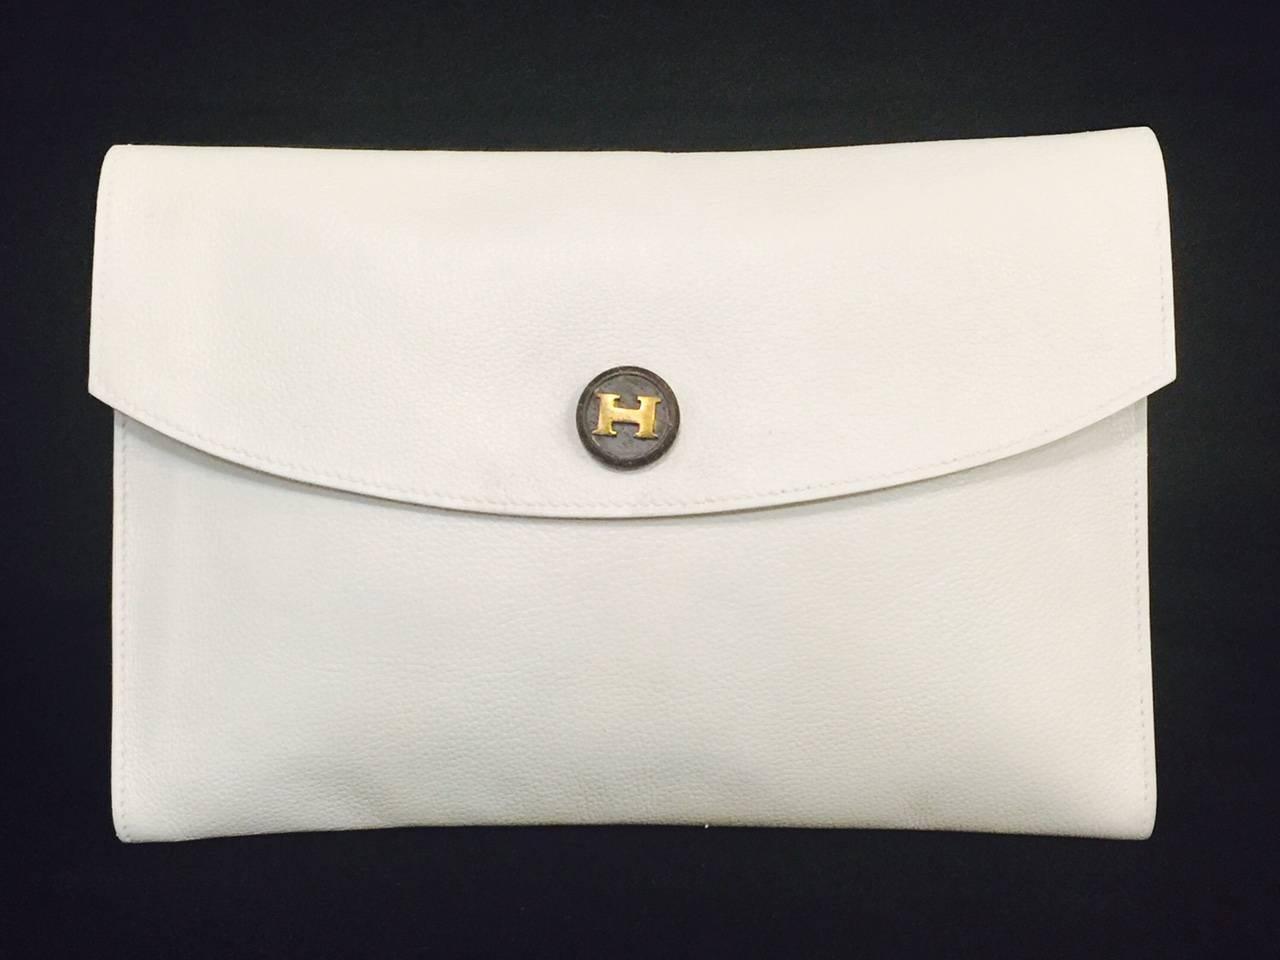 Fit for a lady, this  Vintage Hermes White Leather  Clutch is a wonderful addition to any connoisseur's collection!  Features the most sublime, supple leather, classic "envelope" design and GHW.  Slightly curved flap, white stitching all